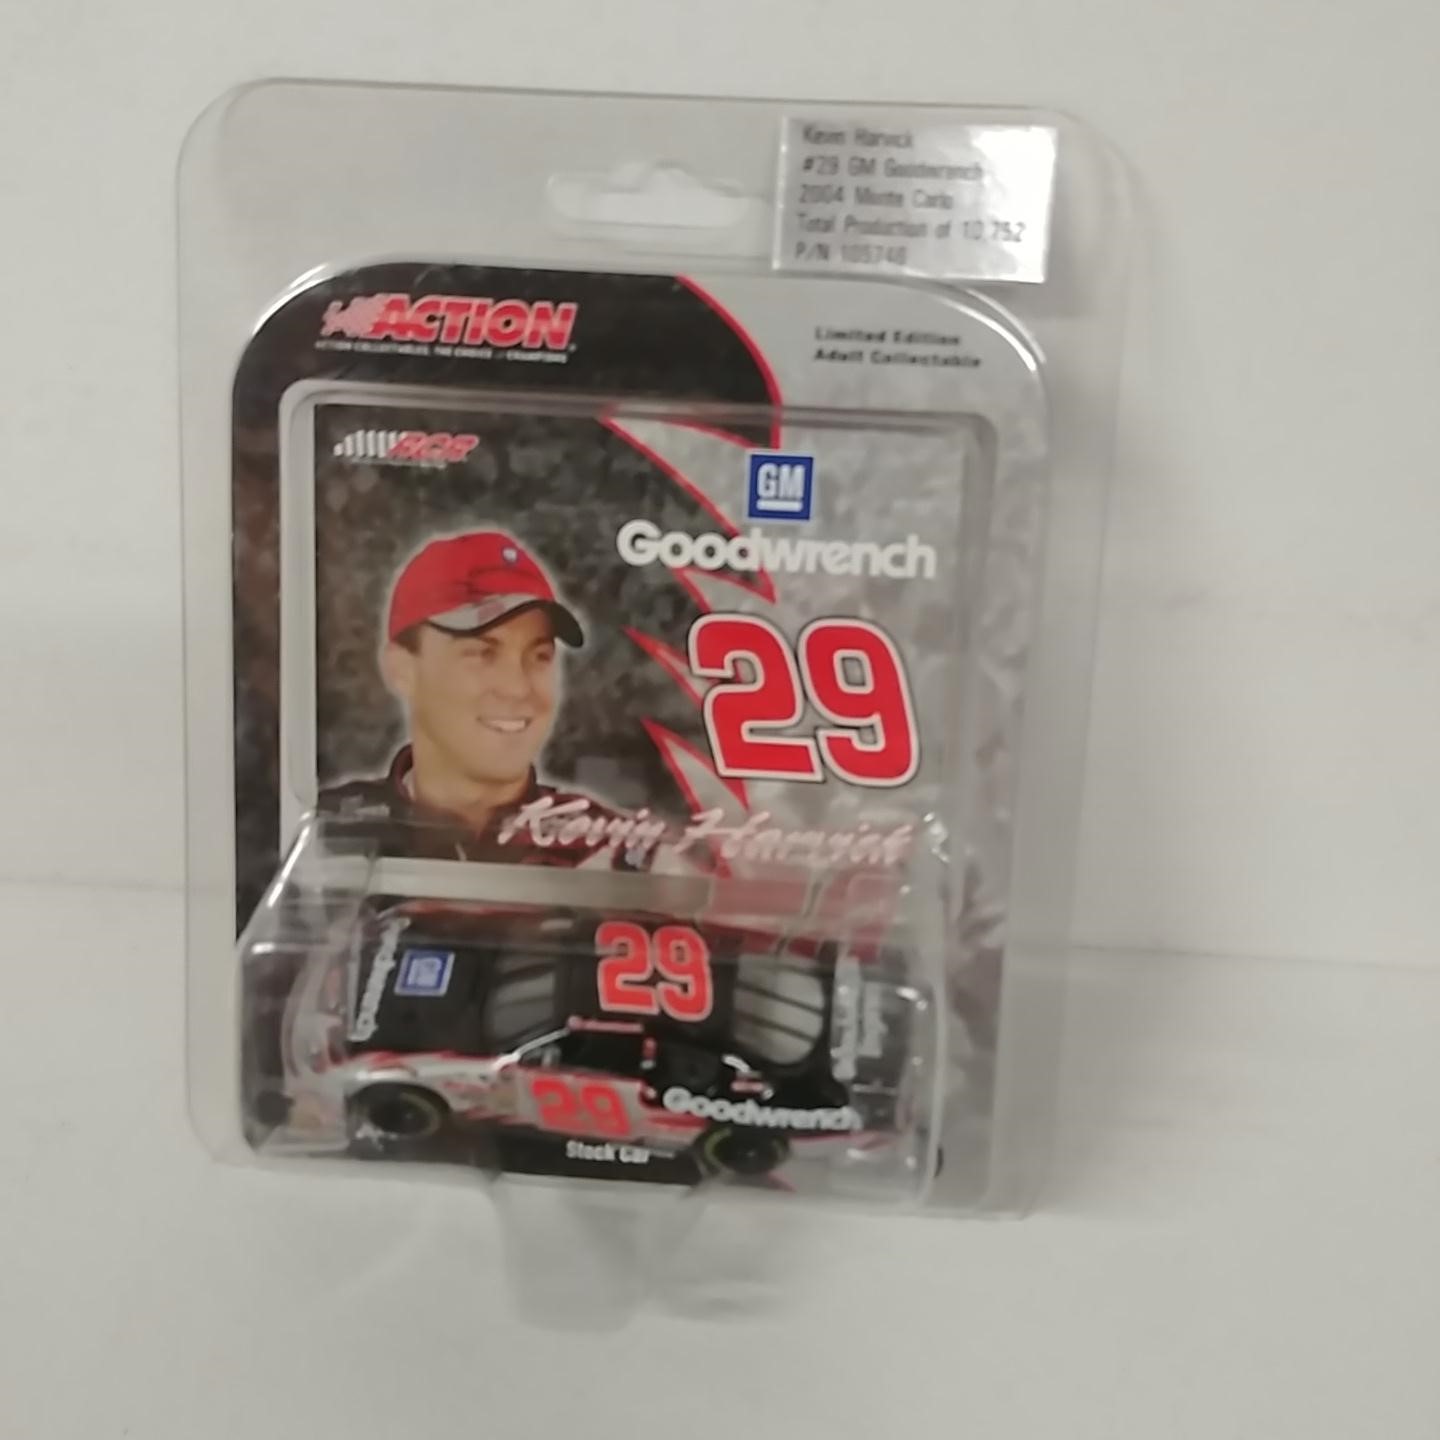 2004 Kevin Harvick 1/64th Goodwrench car